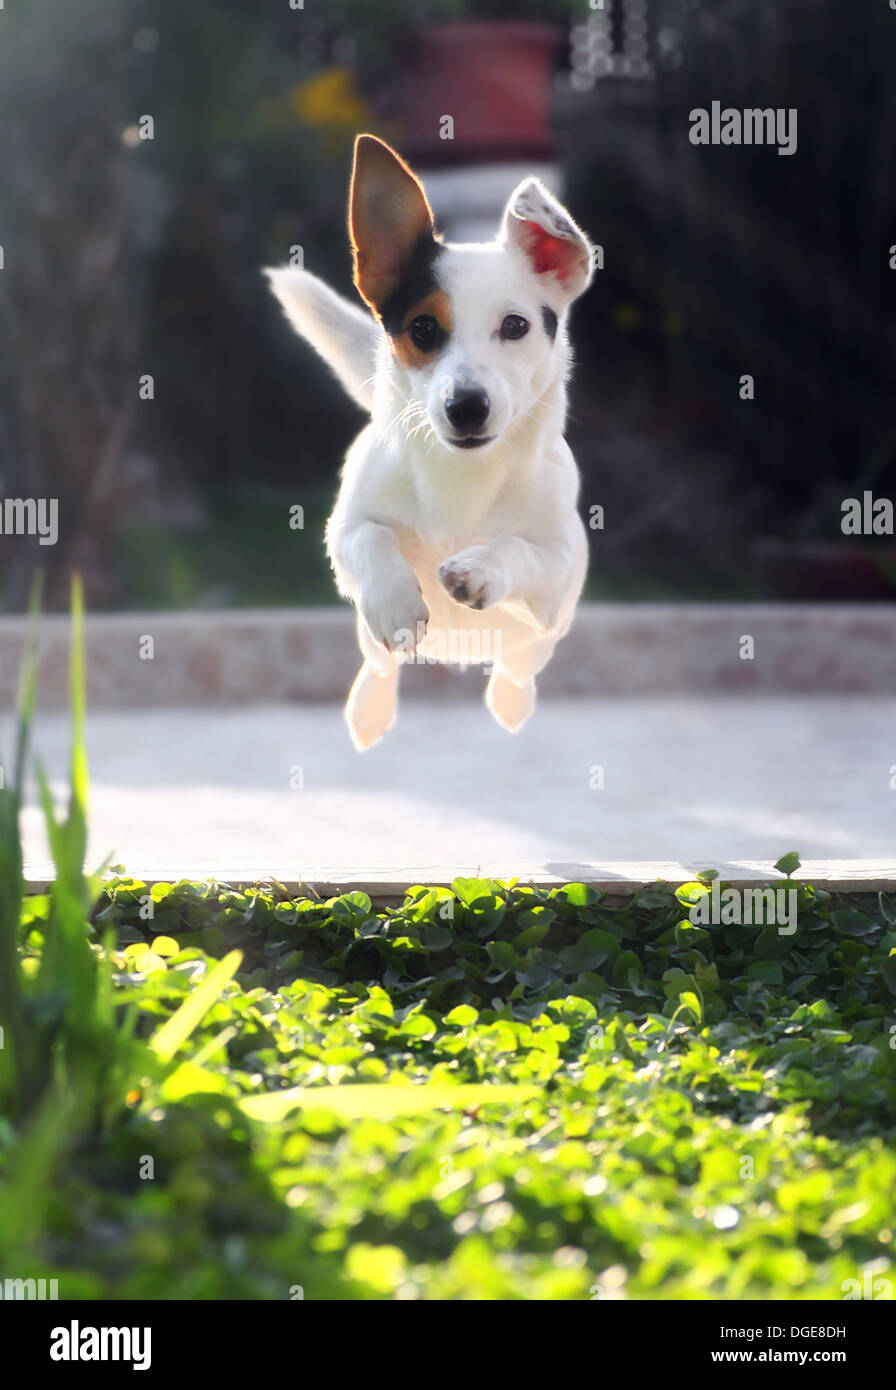 Jumping Jack Russell Terrier de projection d'ball aport. Banque D'Images